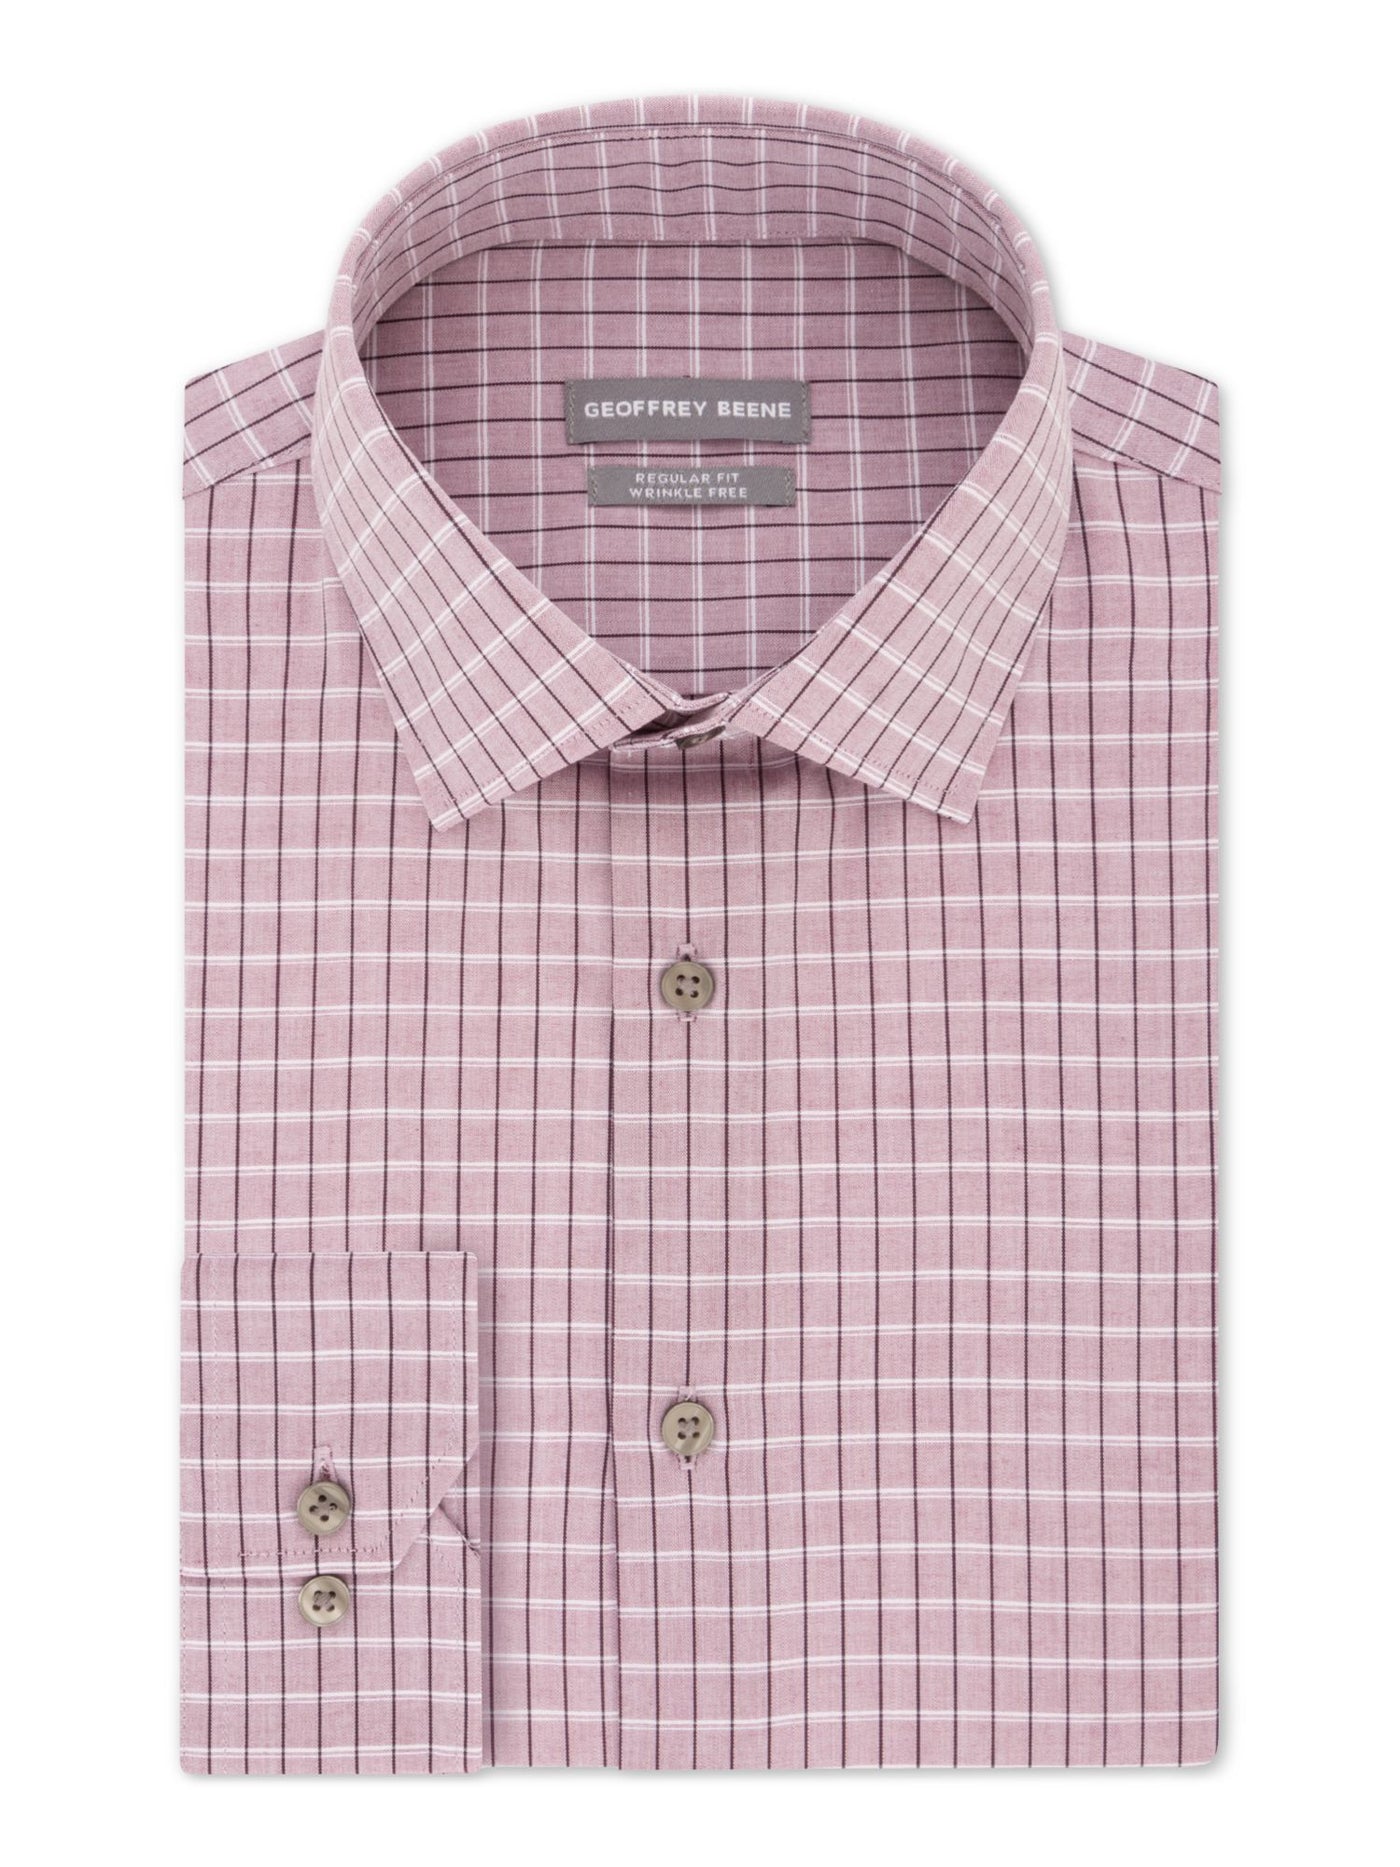 GEOFFREY BEENE Mens Red Easy Care, Check Spread Collar Classic Fit Wrinkle Free Dress Shirt S 14/14.5- 32/33